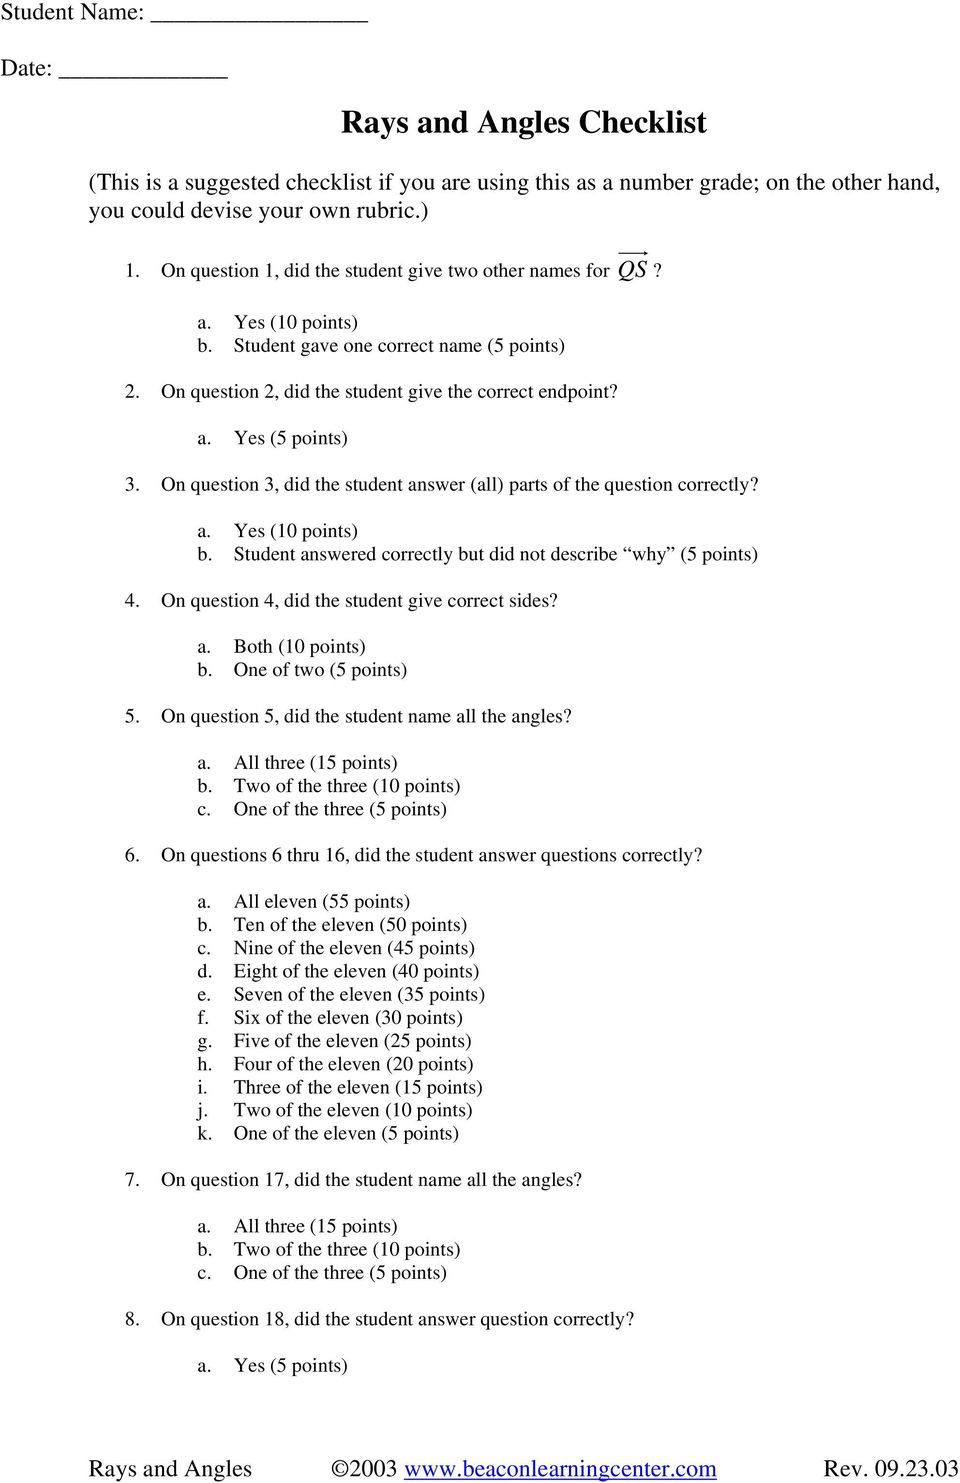 Worksheet 24 Biconditional Statements Answers